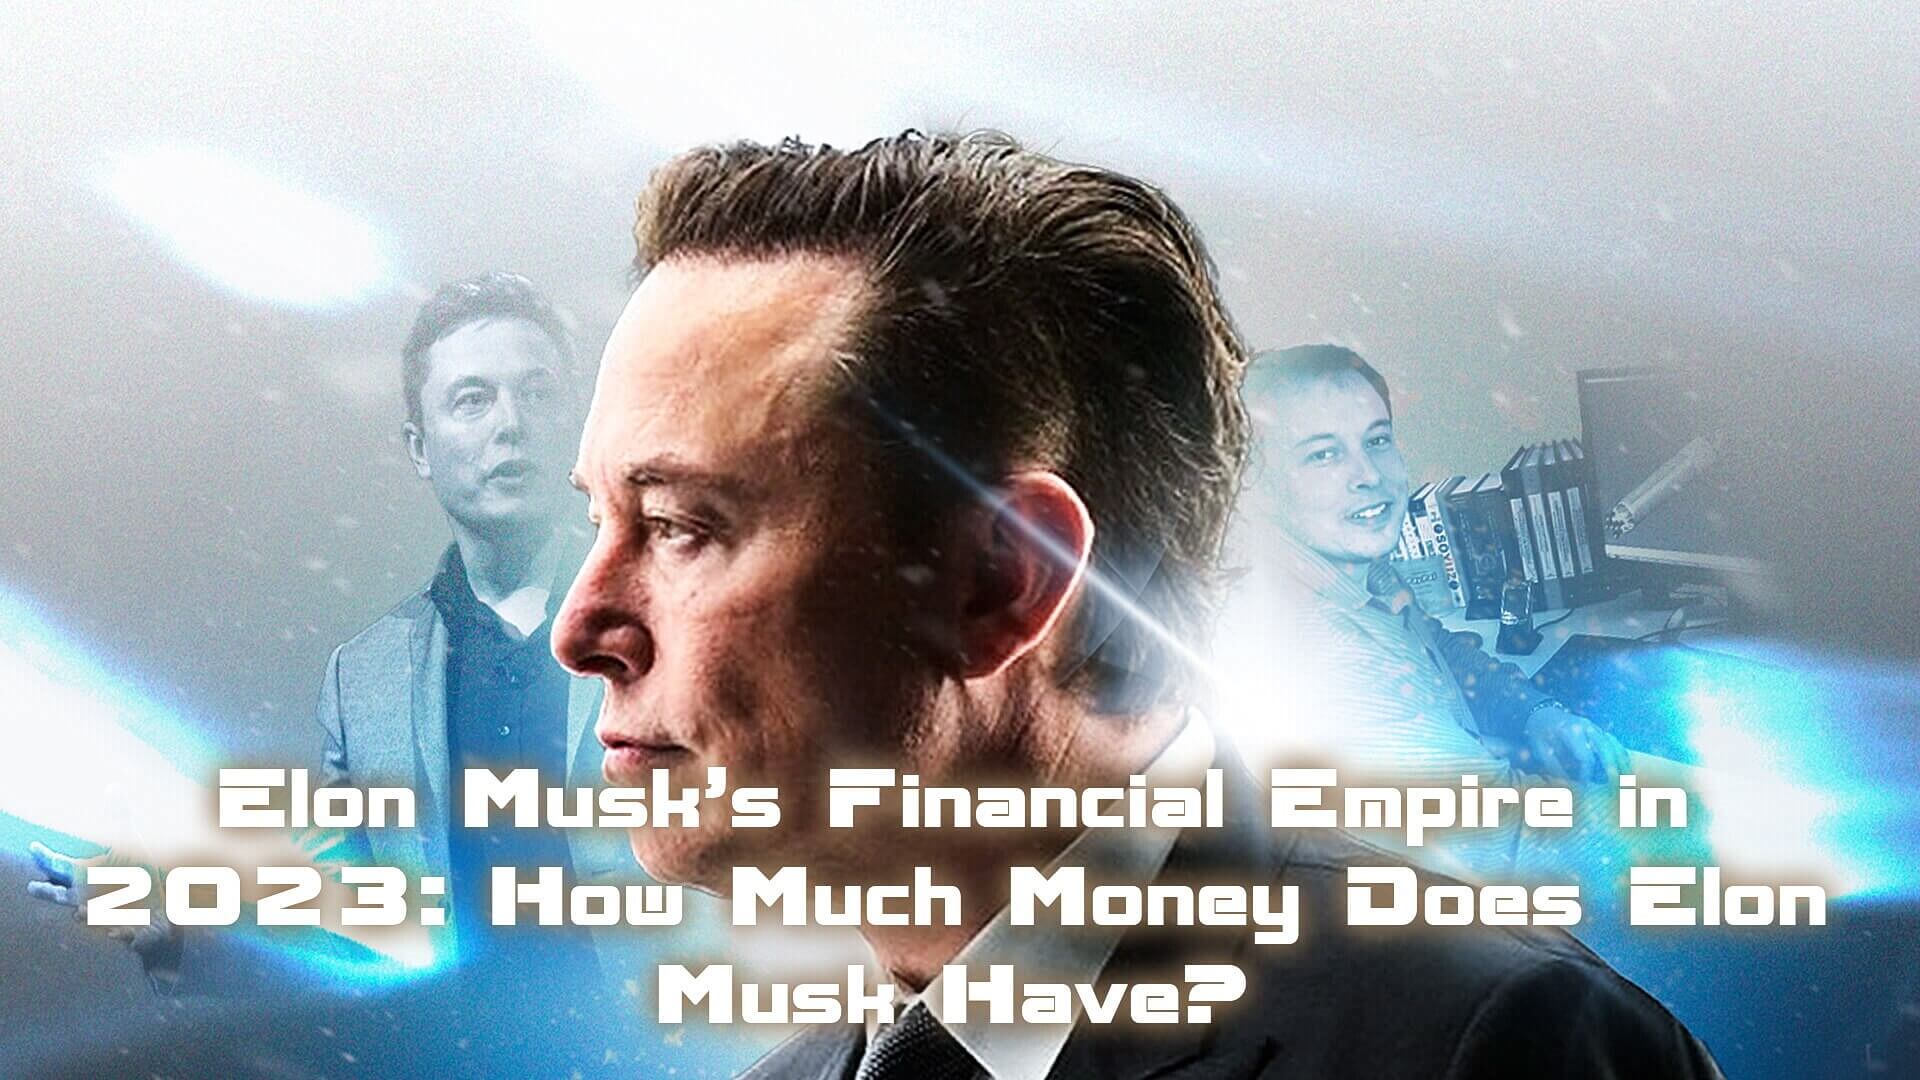 How Much Money Does Elon Musk Have?